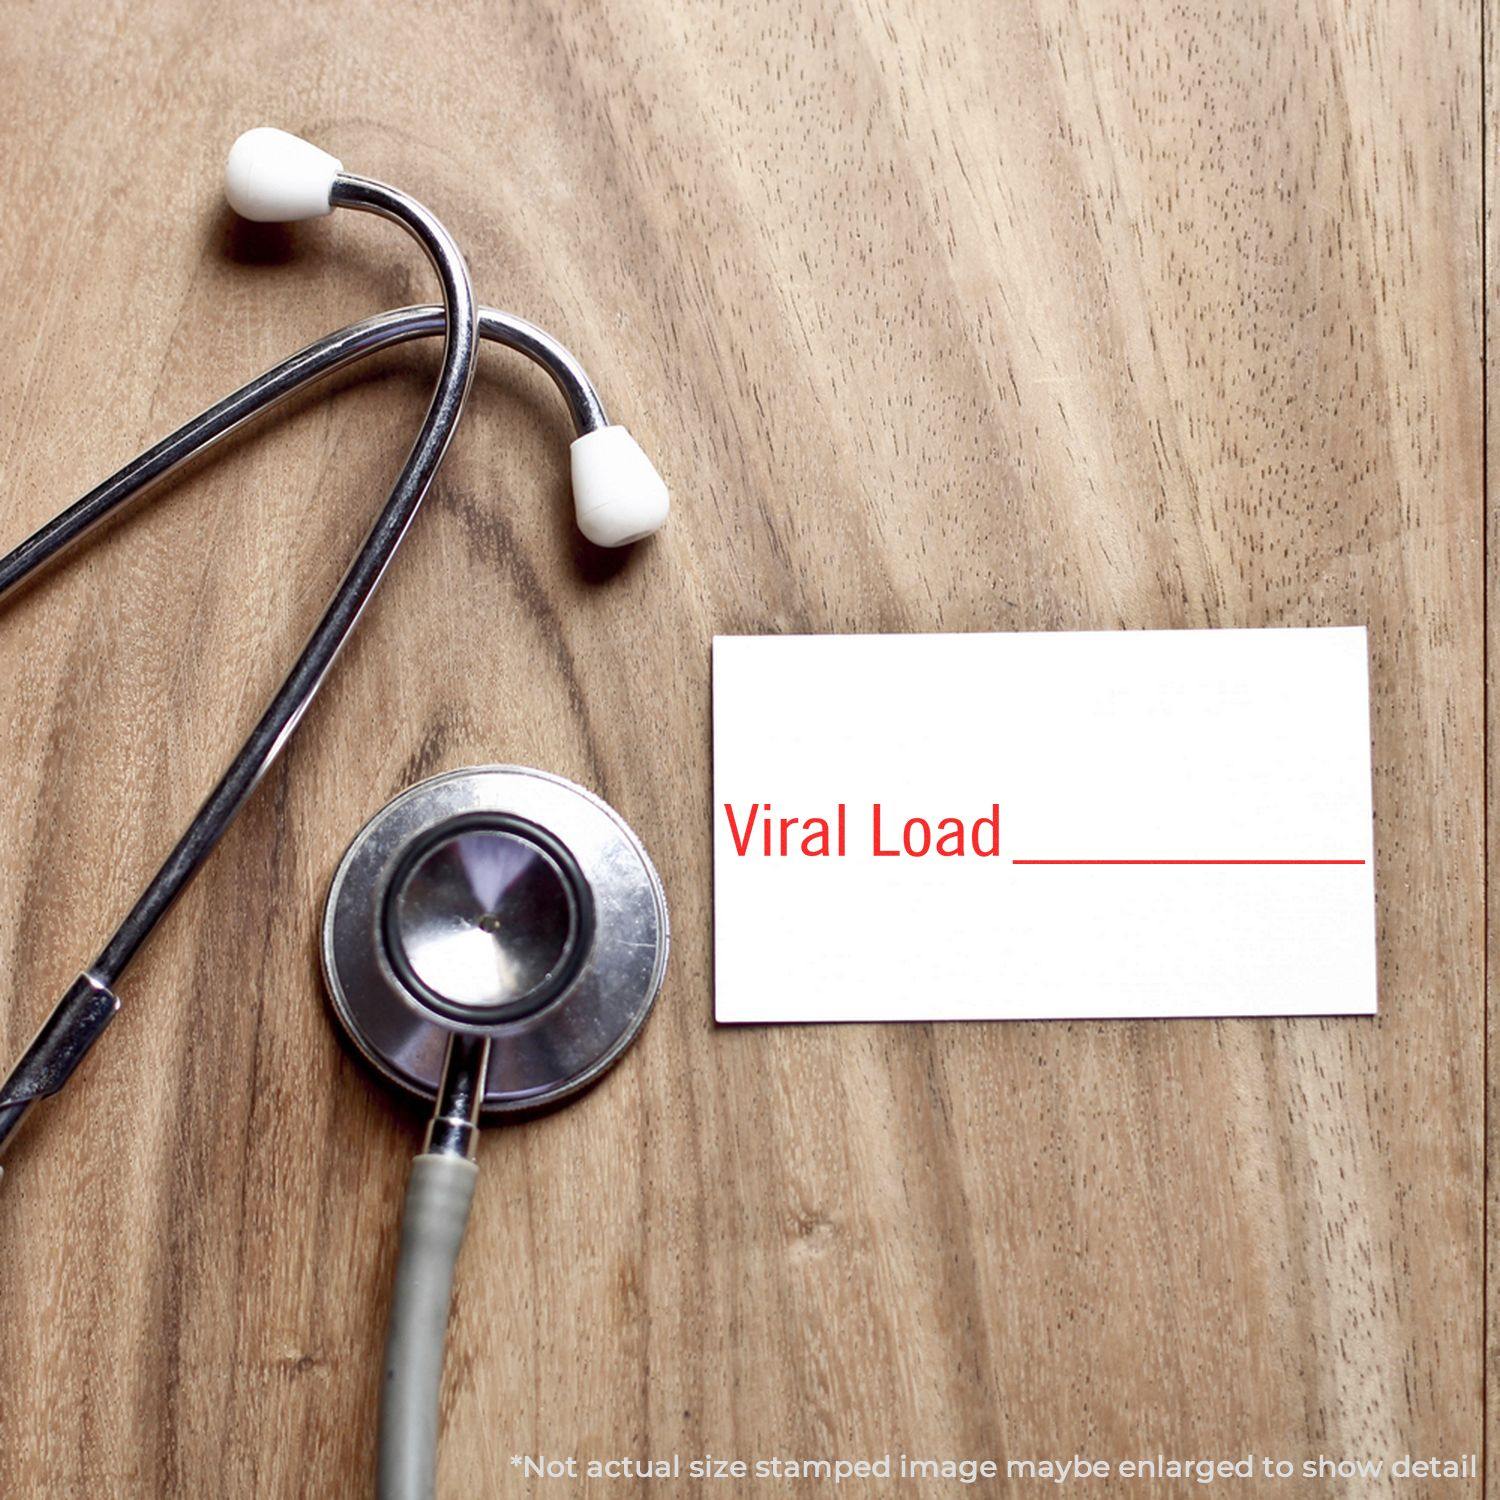 A stock office rubber stamp with a stamped image showing how the text "Viral Load" in a large font with a line is displayed after stamping.